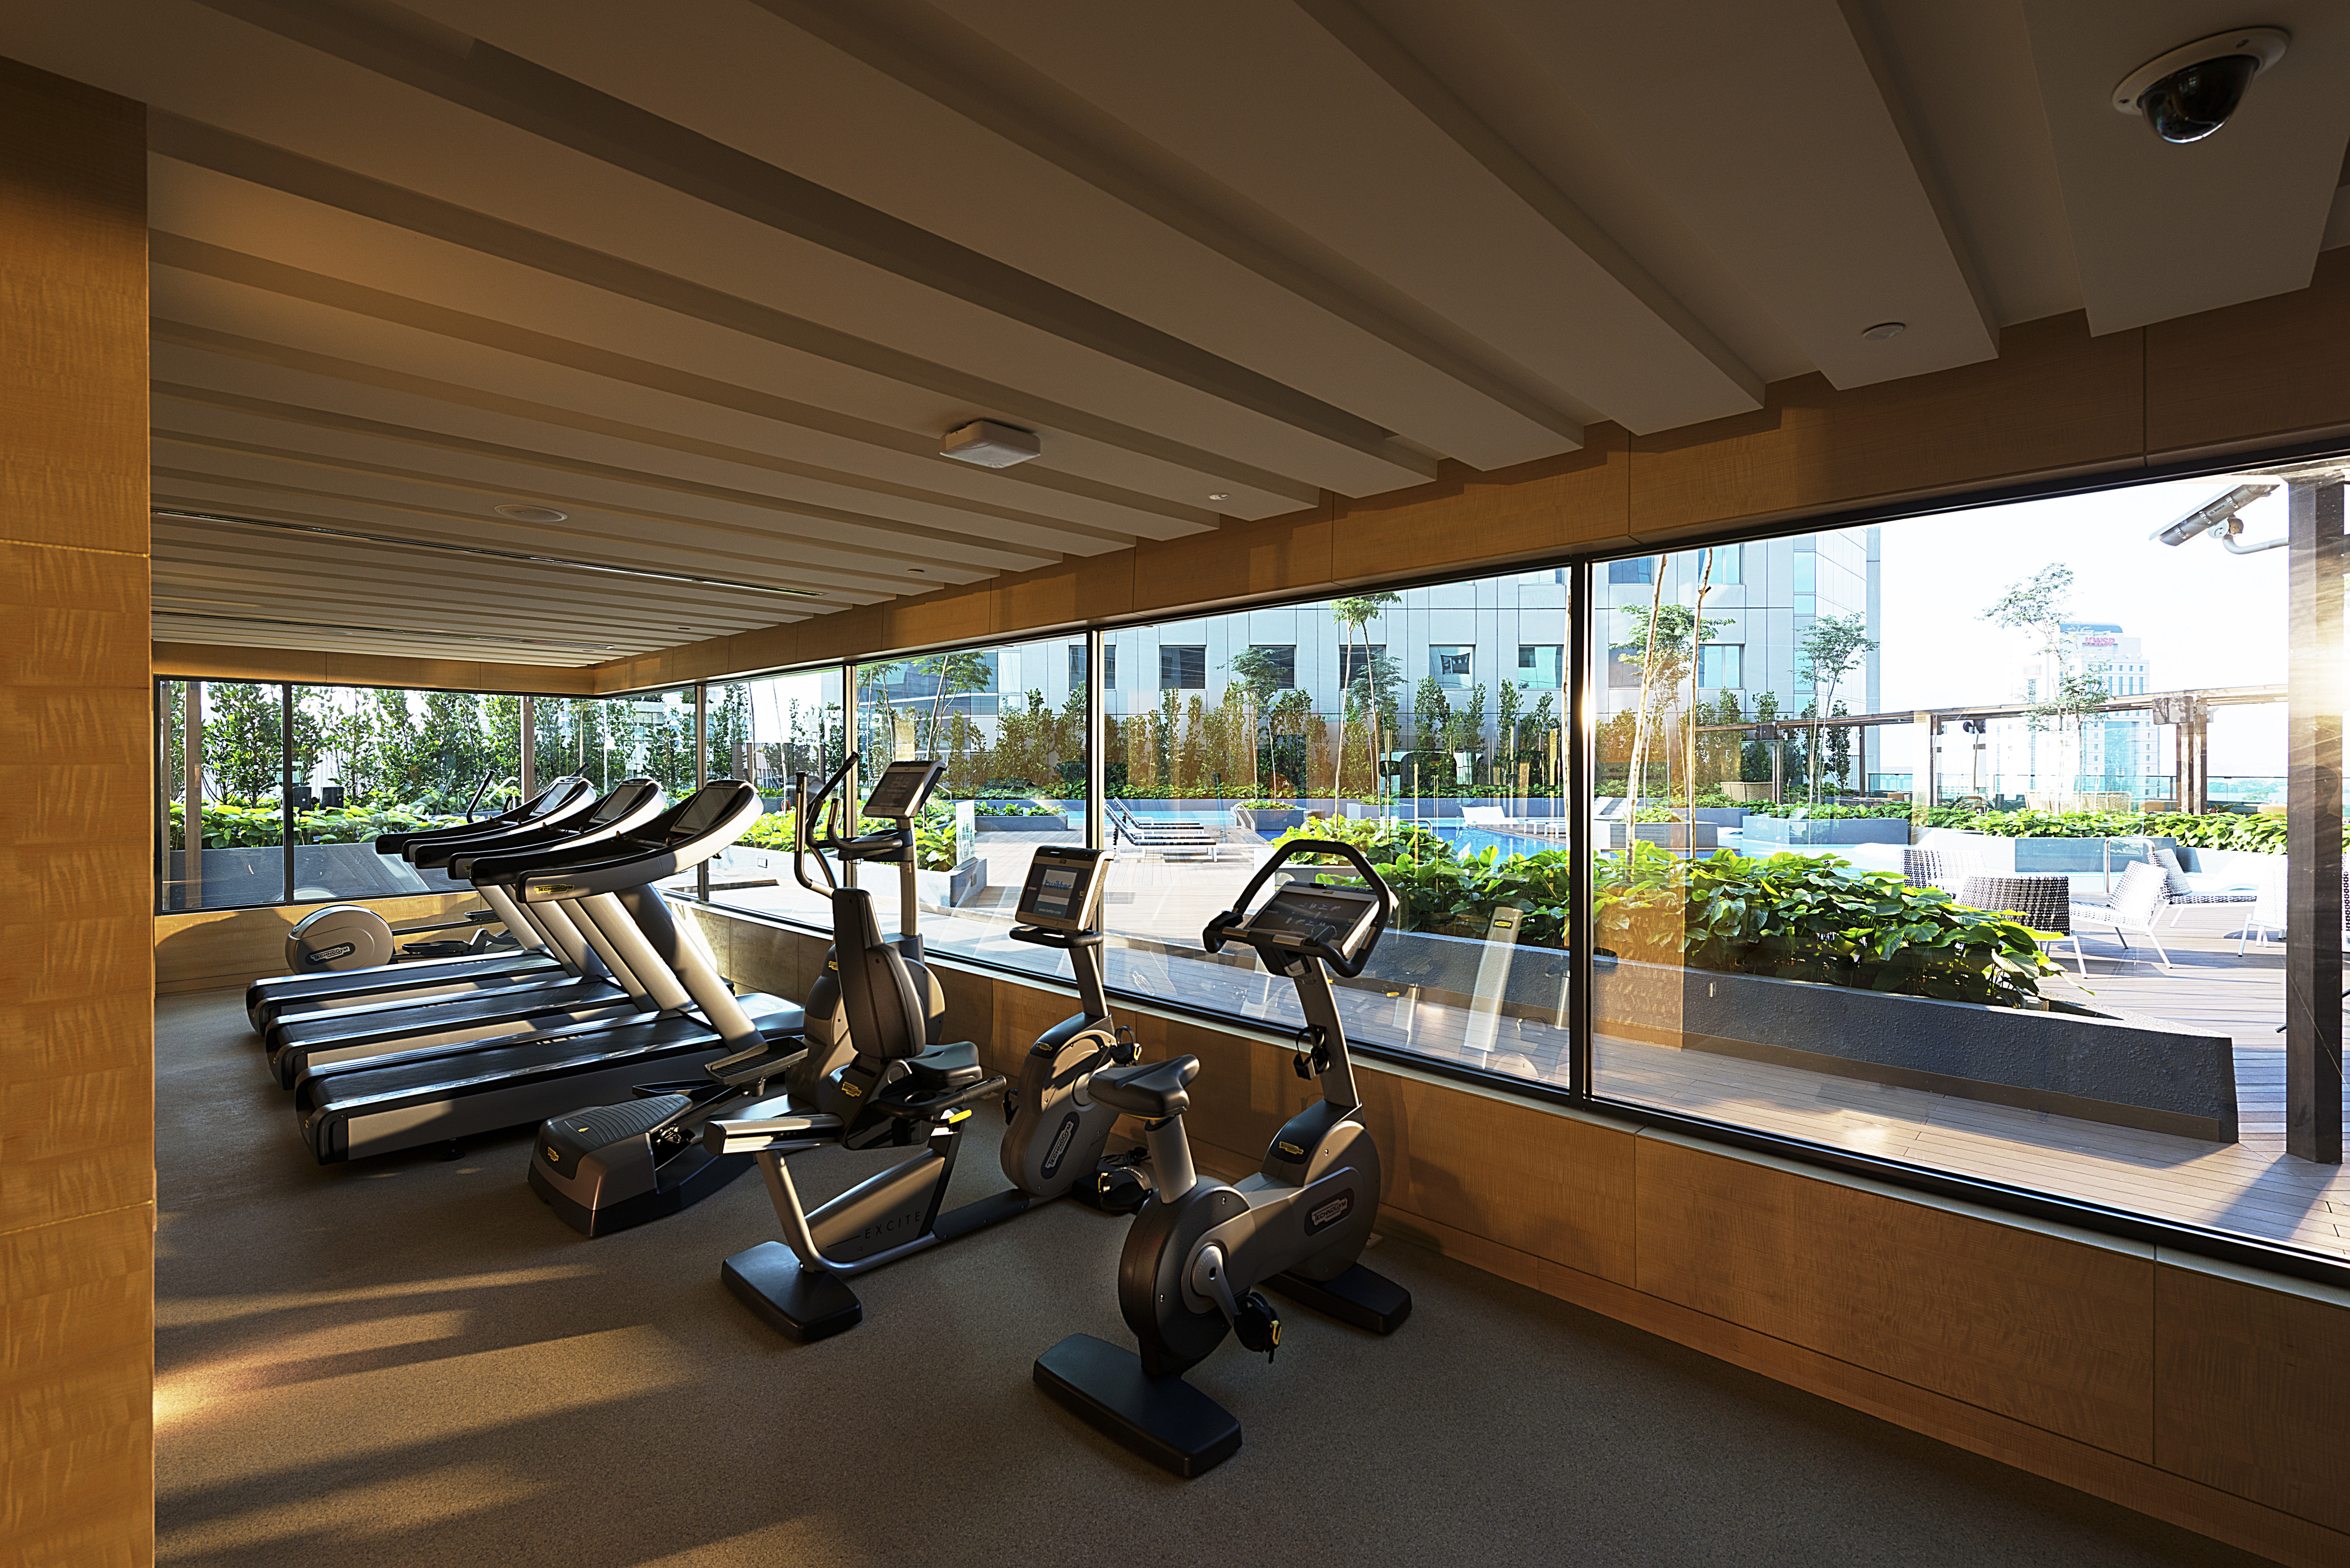 Cardio Machines with View out Windows in Fitness Centre